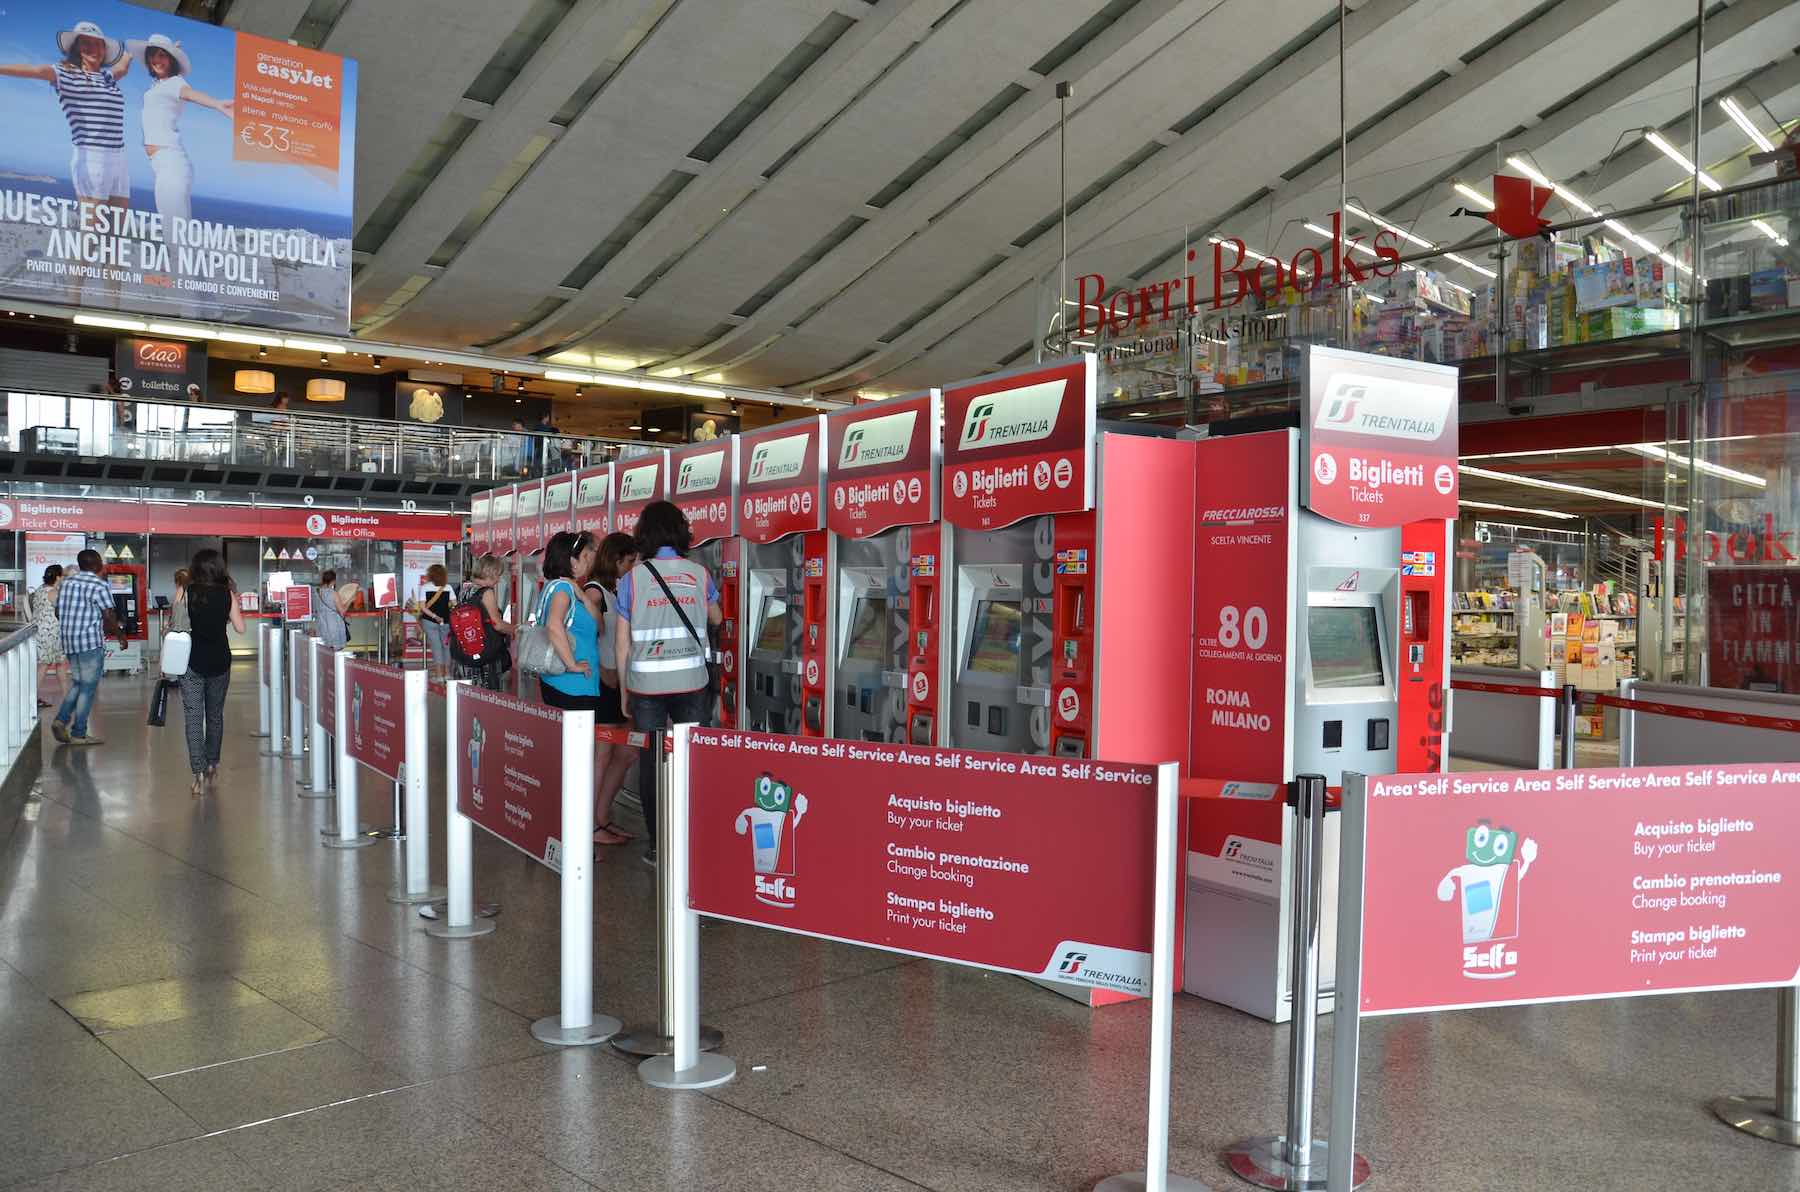 Some of the automatic ticket machines at Roma Termini station (there are automatic ticket machines for both Trenitalia and Italo)